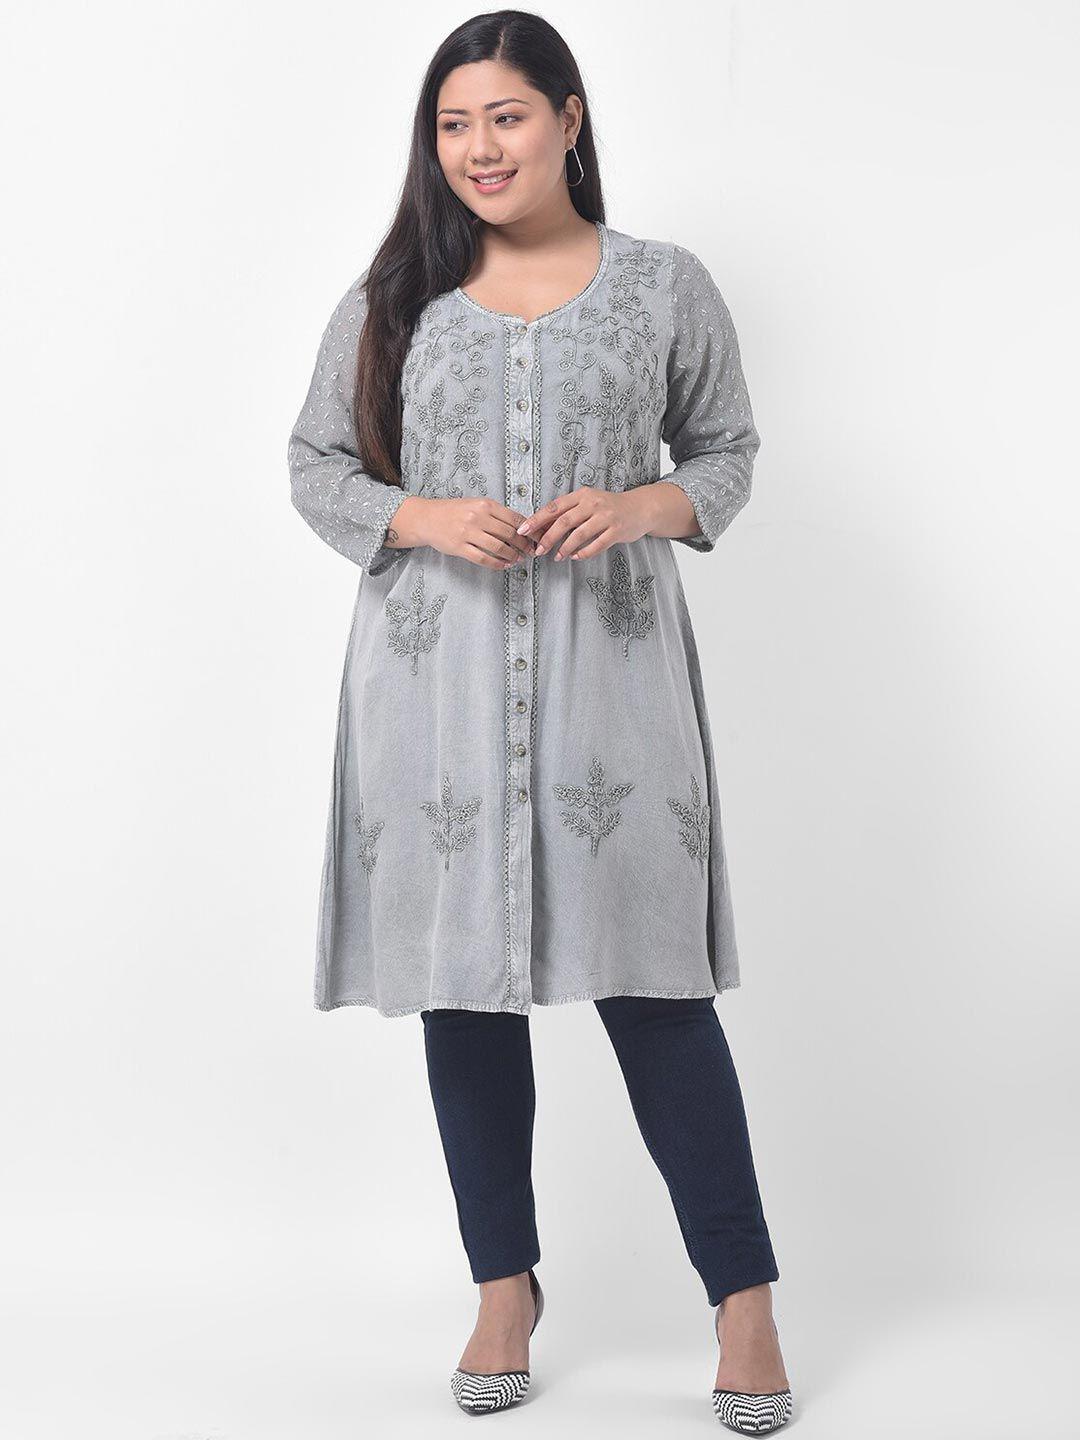 veldress grey floral embroidered longline top plus size